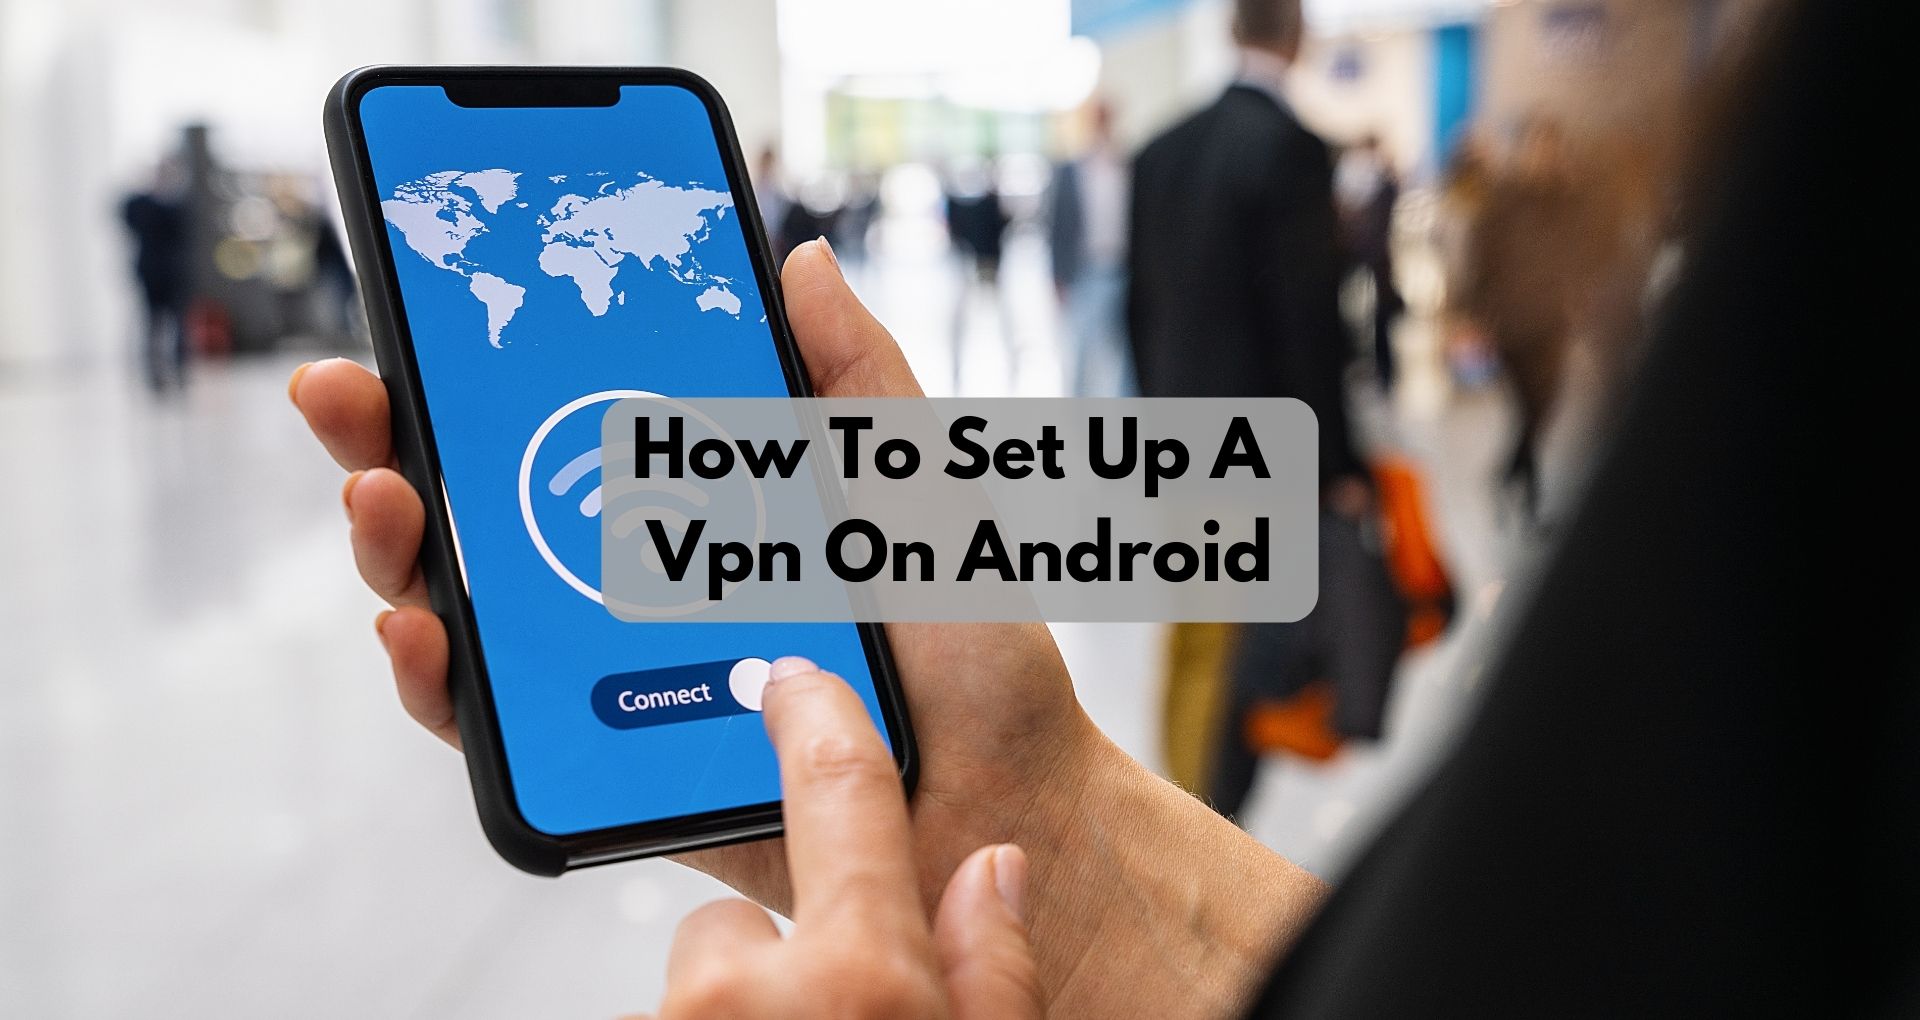 How To Set Up A Vpn On Android?